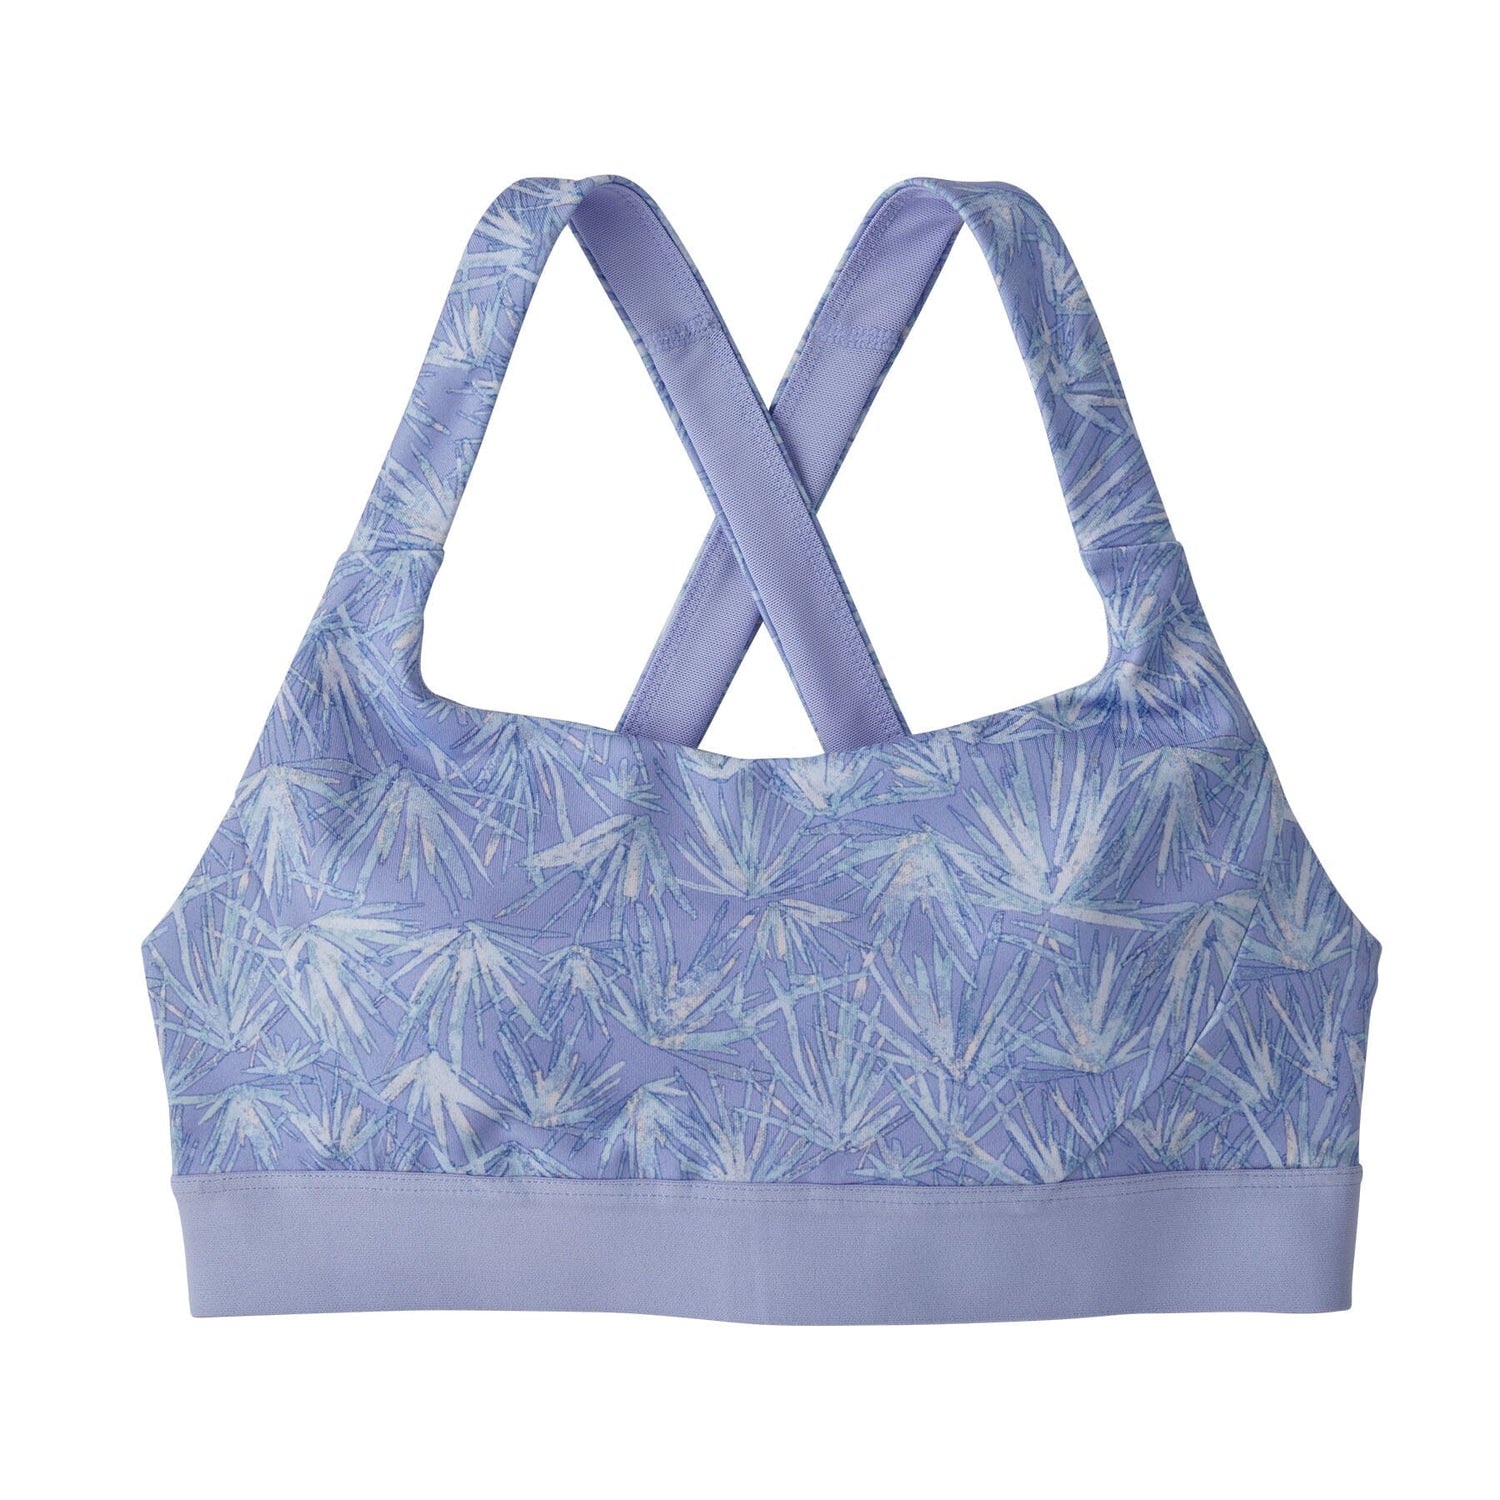 Patagonia Switchback Sports Bra - Recycled Polyester Grasslands: Pale Periwinkle Underwear